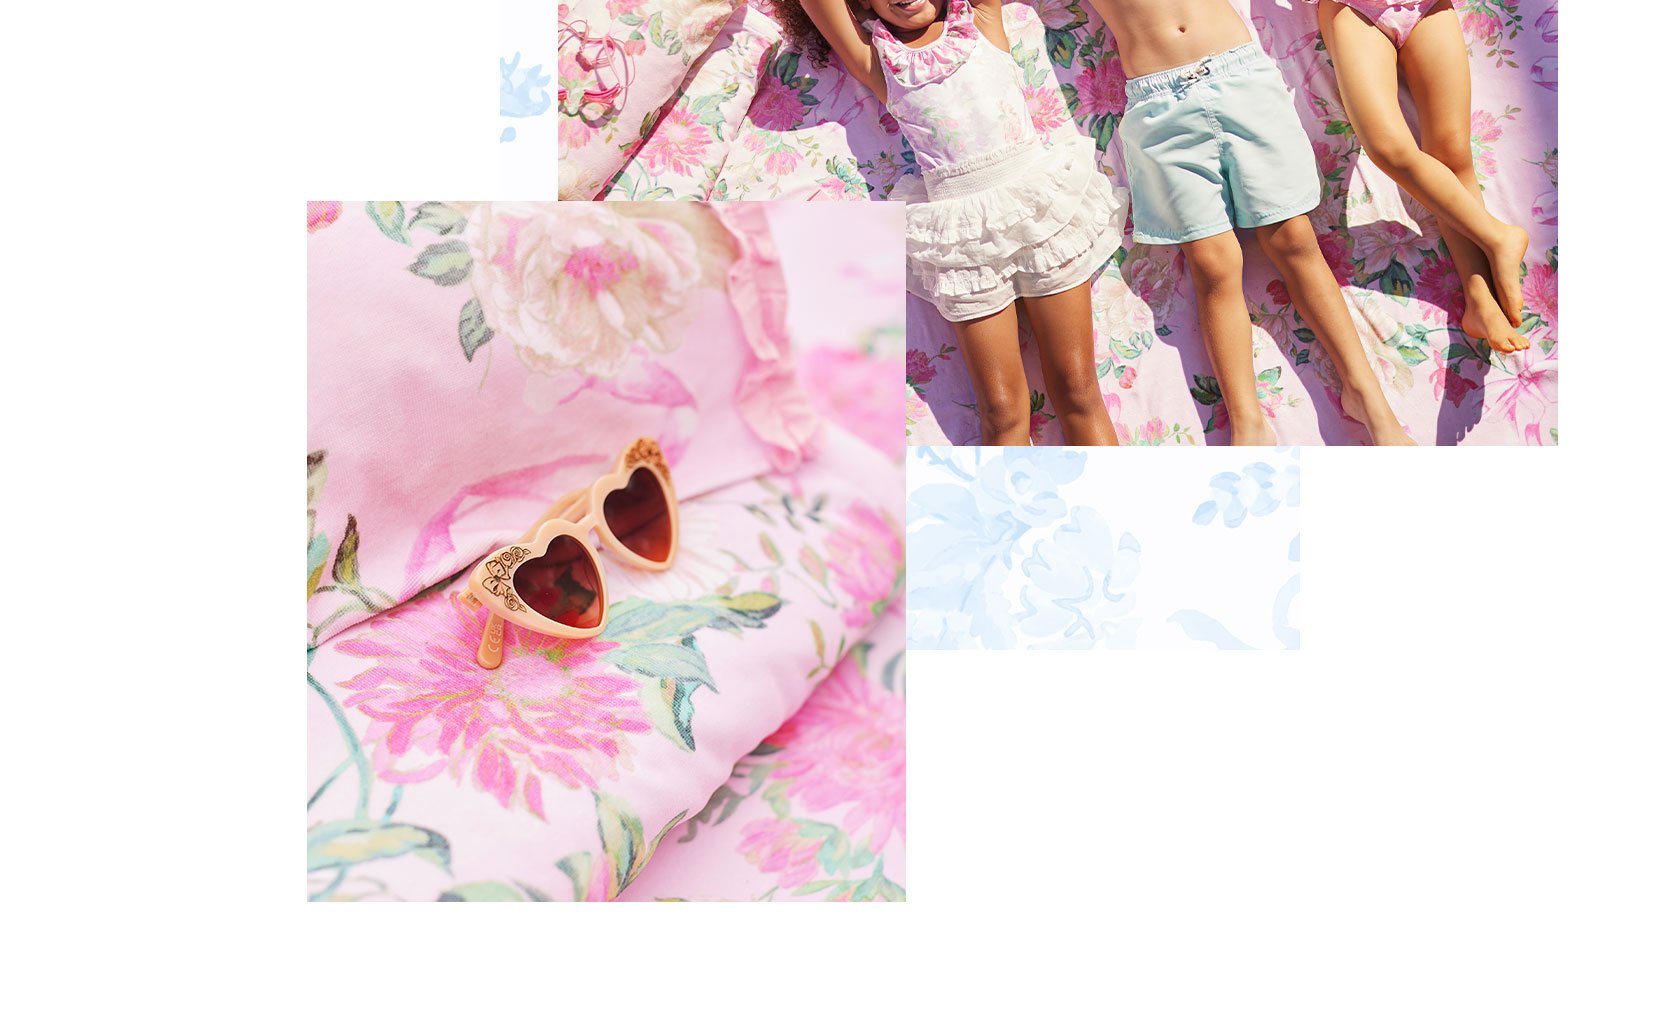 Bring on the sunshine, bring on the smiles. Shop The Collection